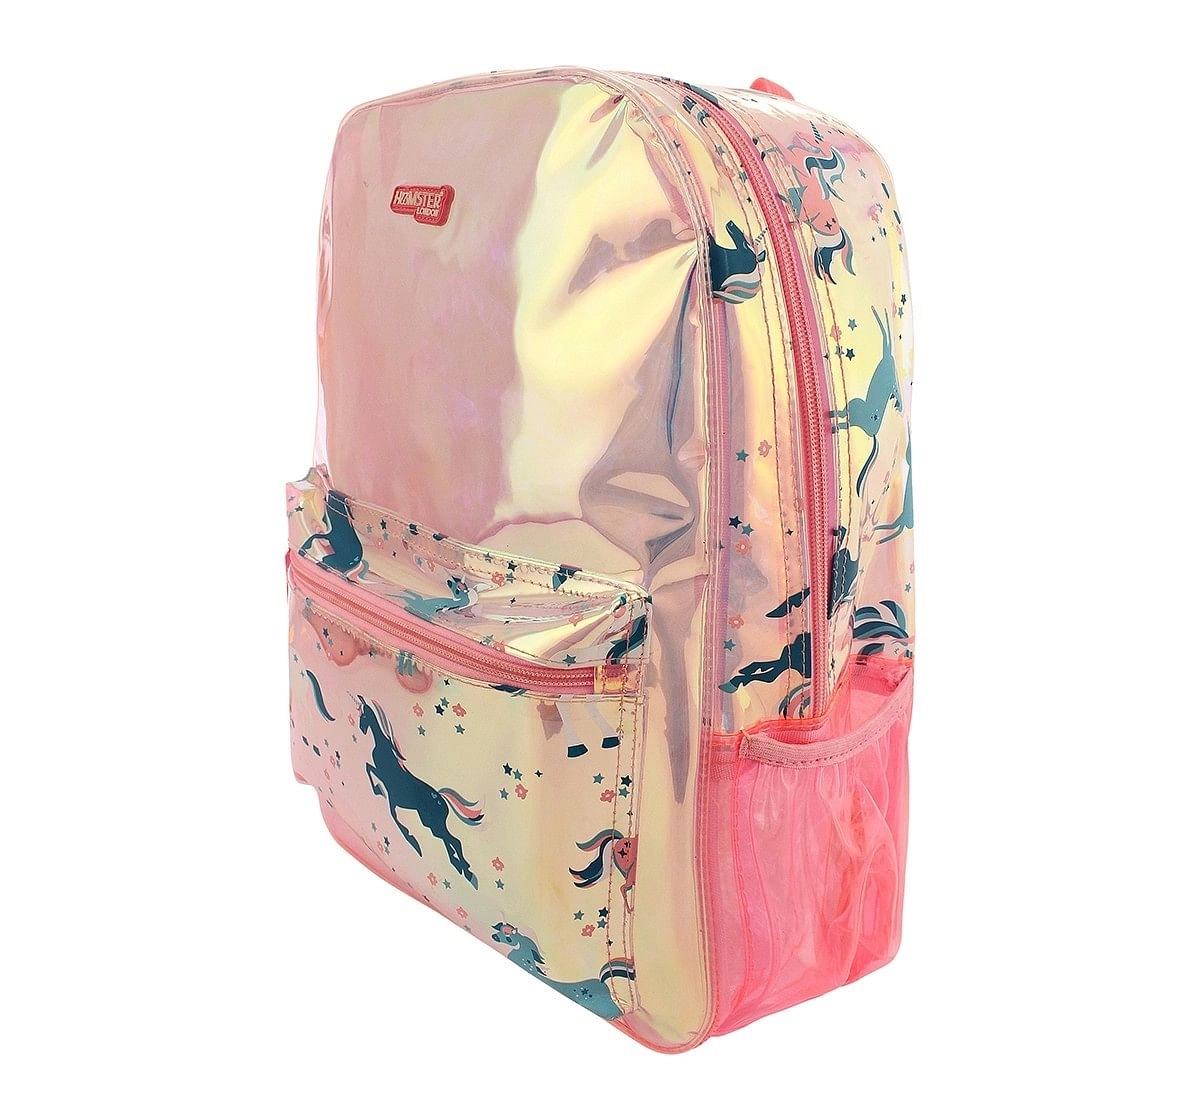 Hamster London Big Unicorn Backpack for age 3Y+ (Pink)